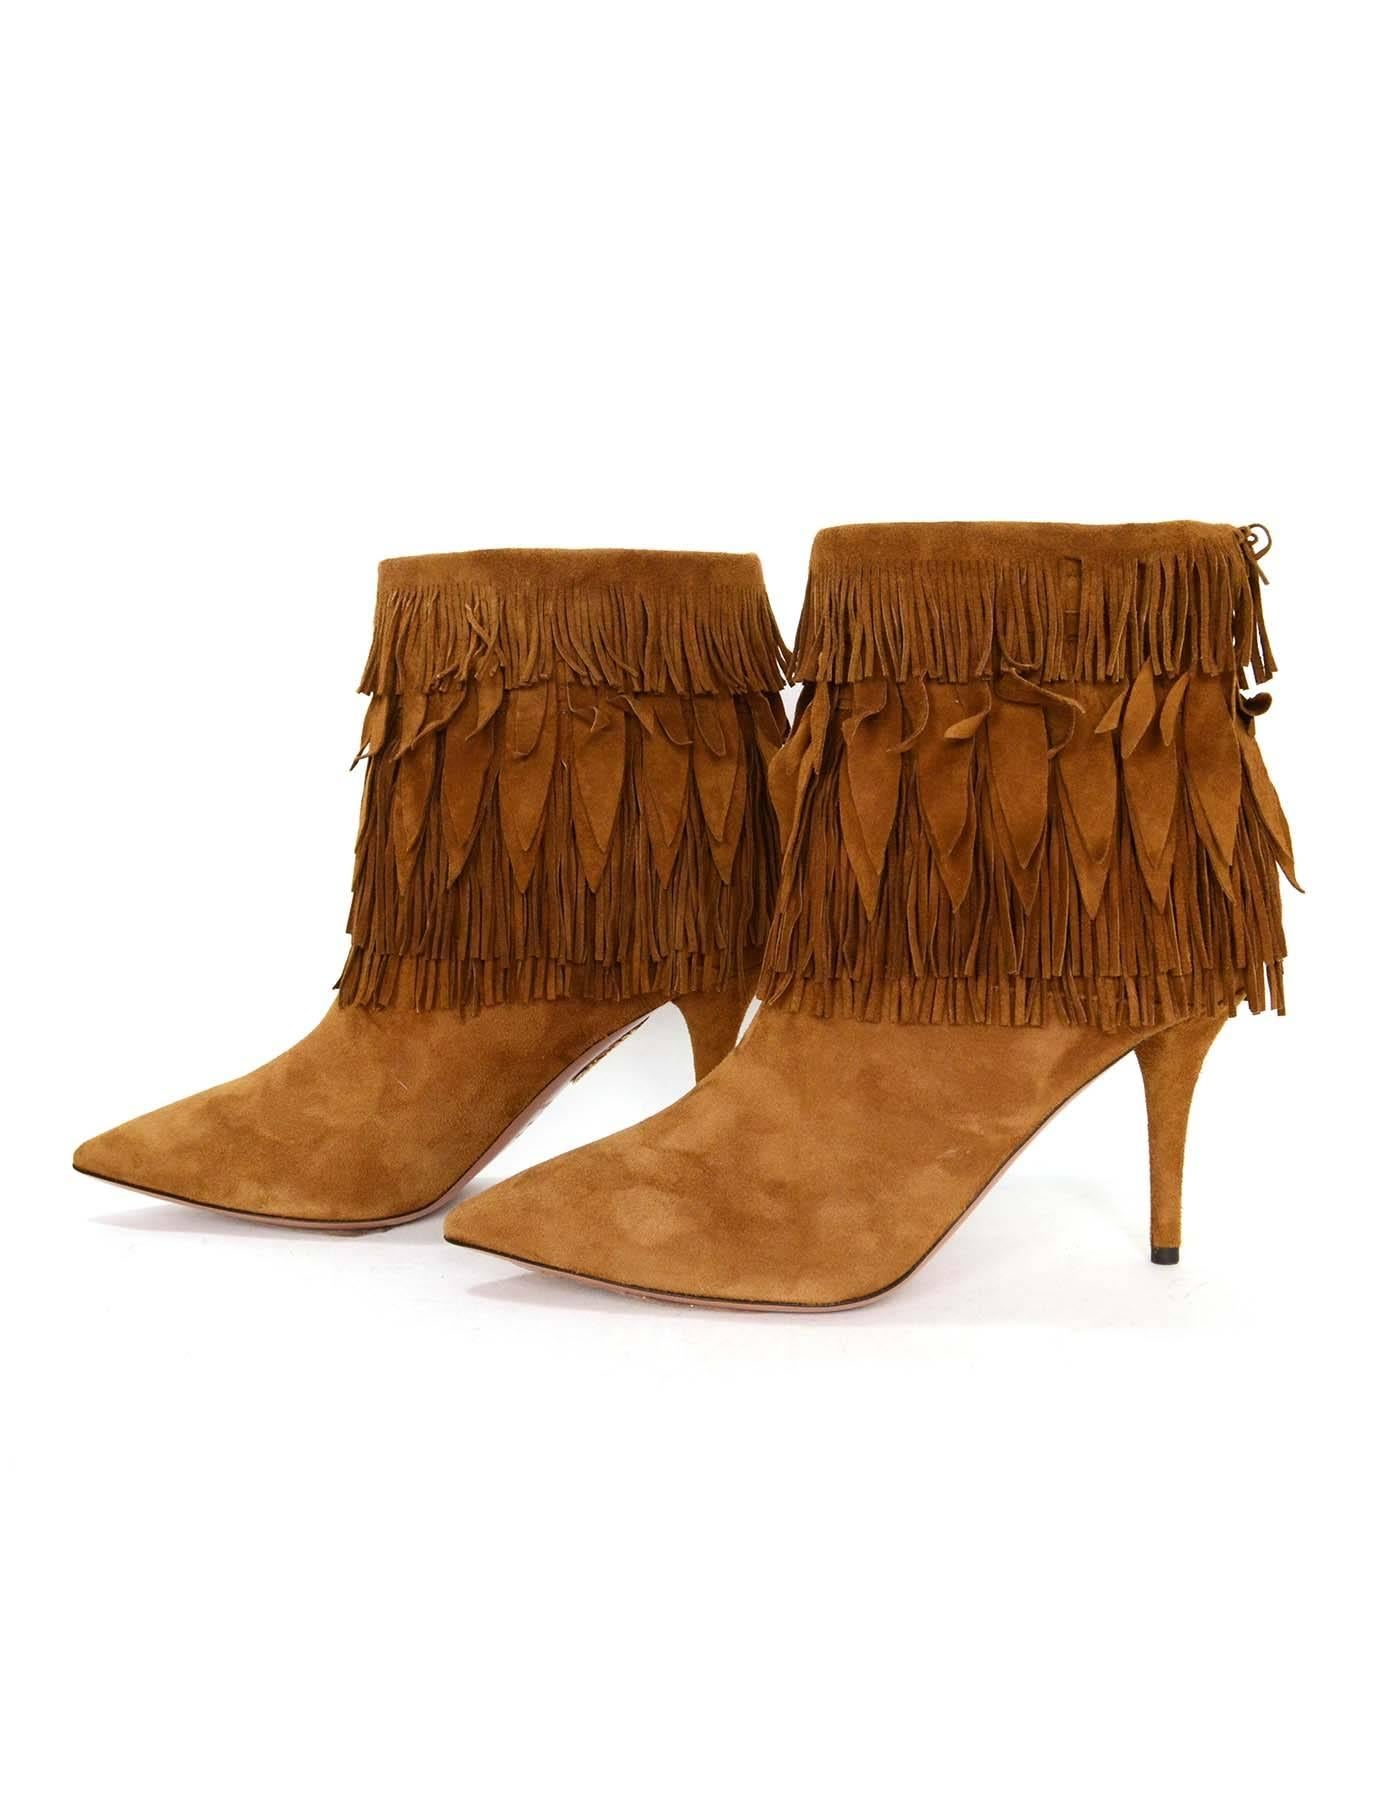 Aquazzura Tan Suede Fringe Ankle Booties 
Features different sized fringe throughout
Made In: Italy
Color: Tan
Materials: Suede
Closure/Opening: Pull on
Sole Stamp: Aquazurra Firenze Vero Cuoio Made in Italy 38
Retail Price: $995 +